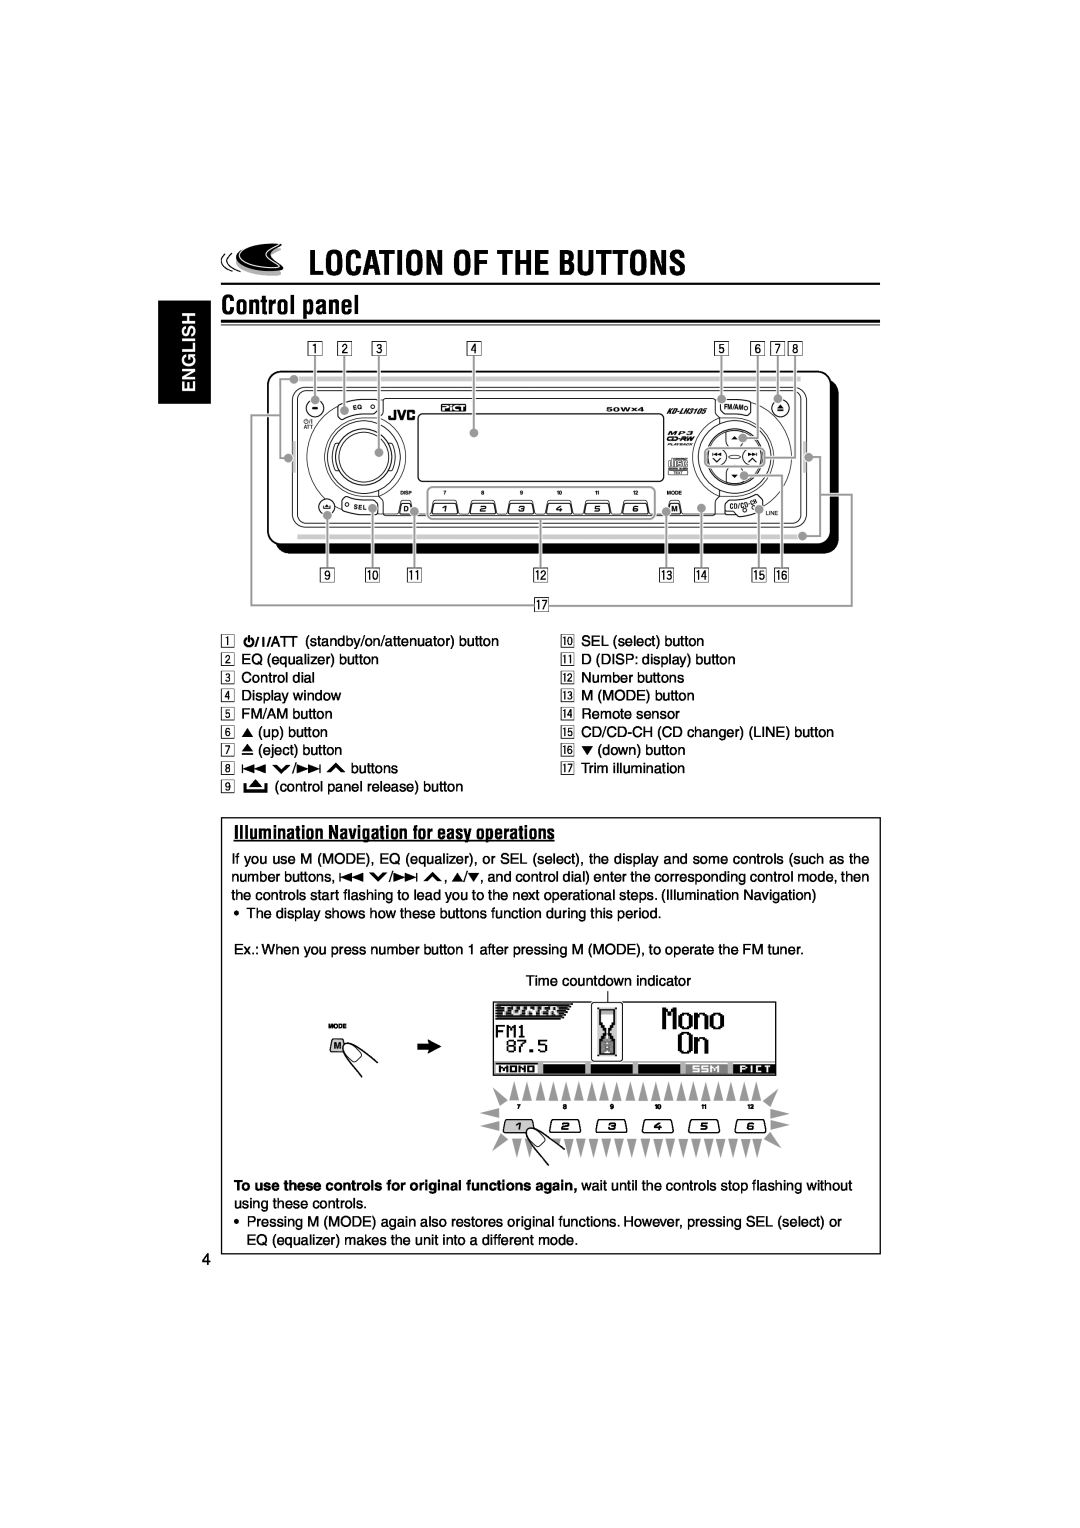 JVC KD-LH3105 manual Location Of The Buttons, Control panel, English, Illumination Navigation for easy operations 